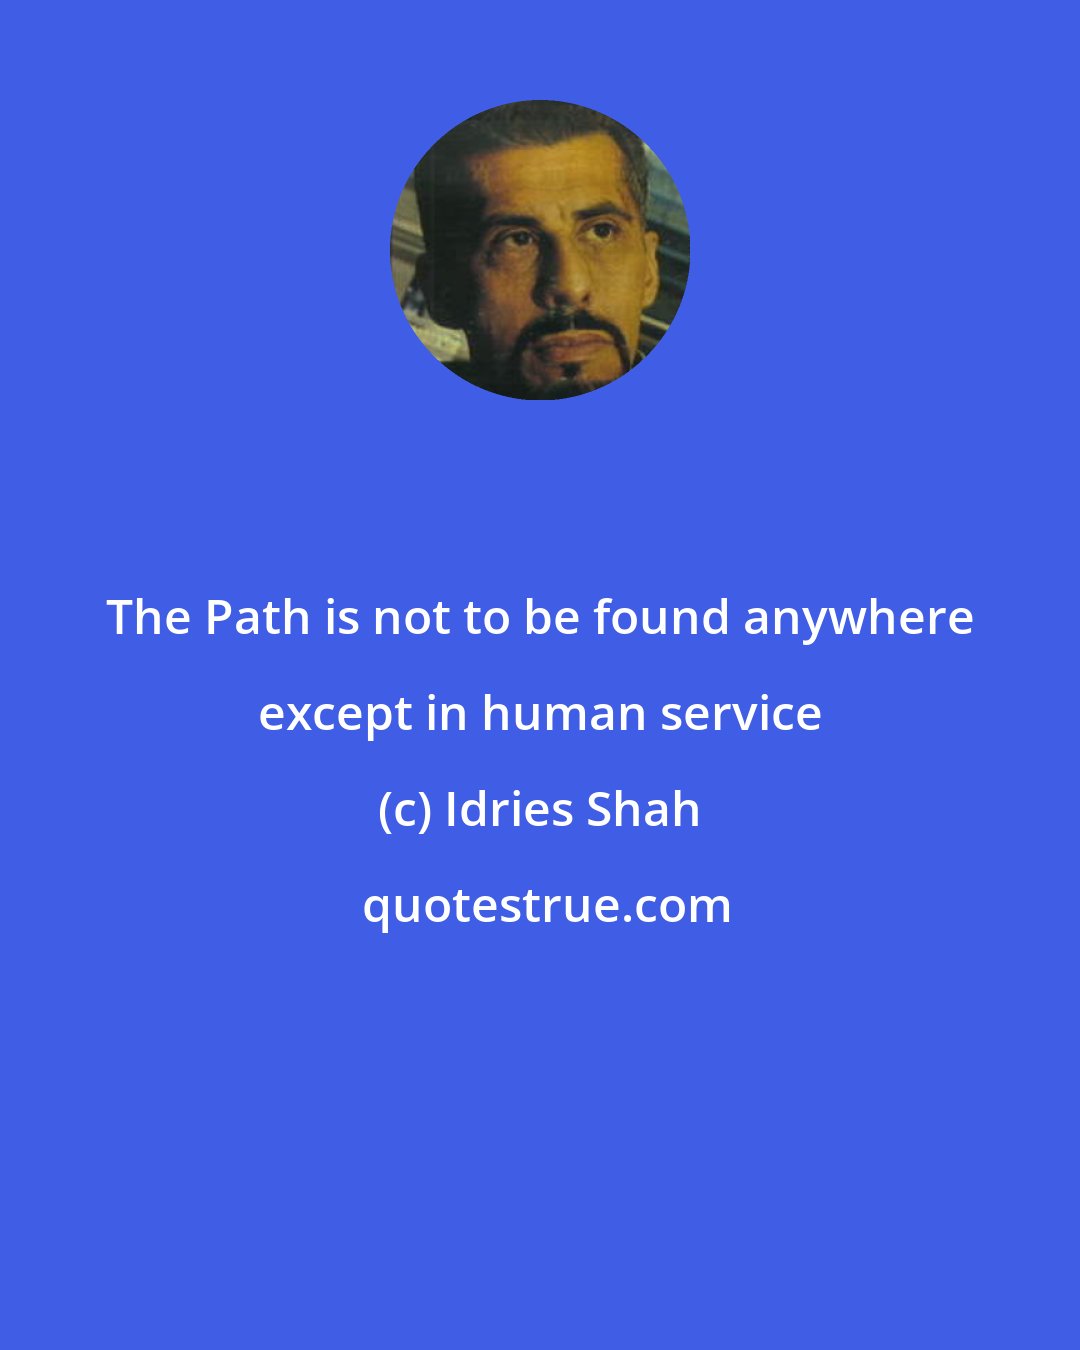 Idries Shah: The Path is not to be found anywhere except in human service